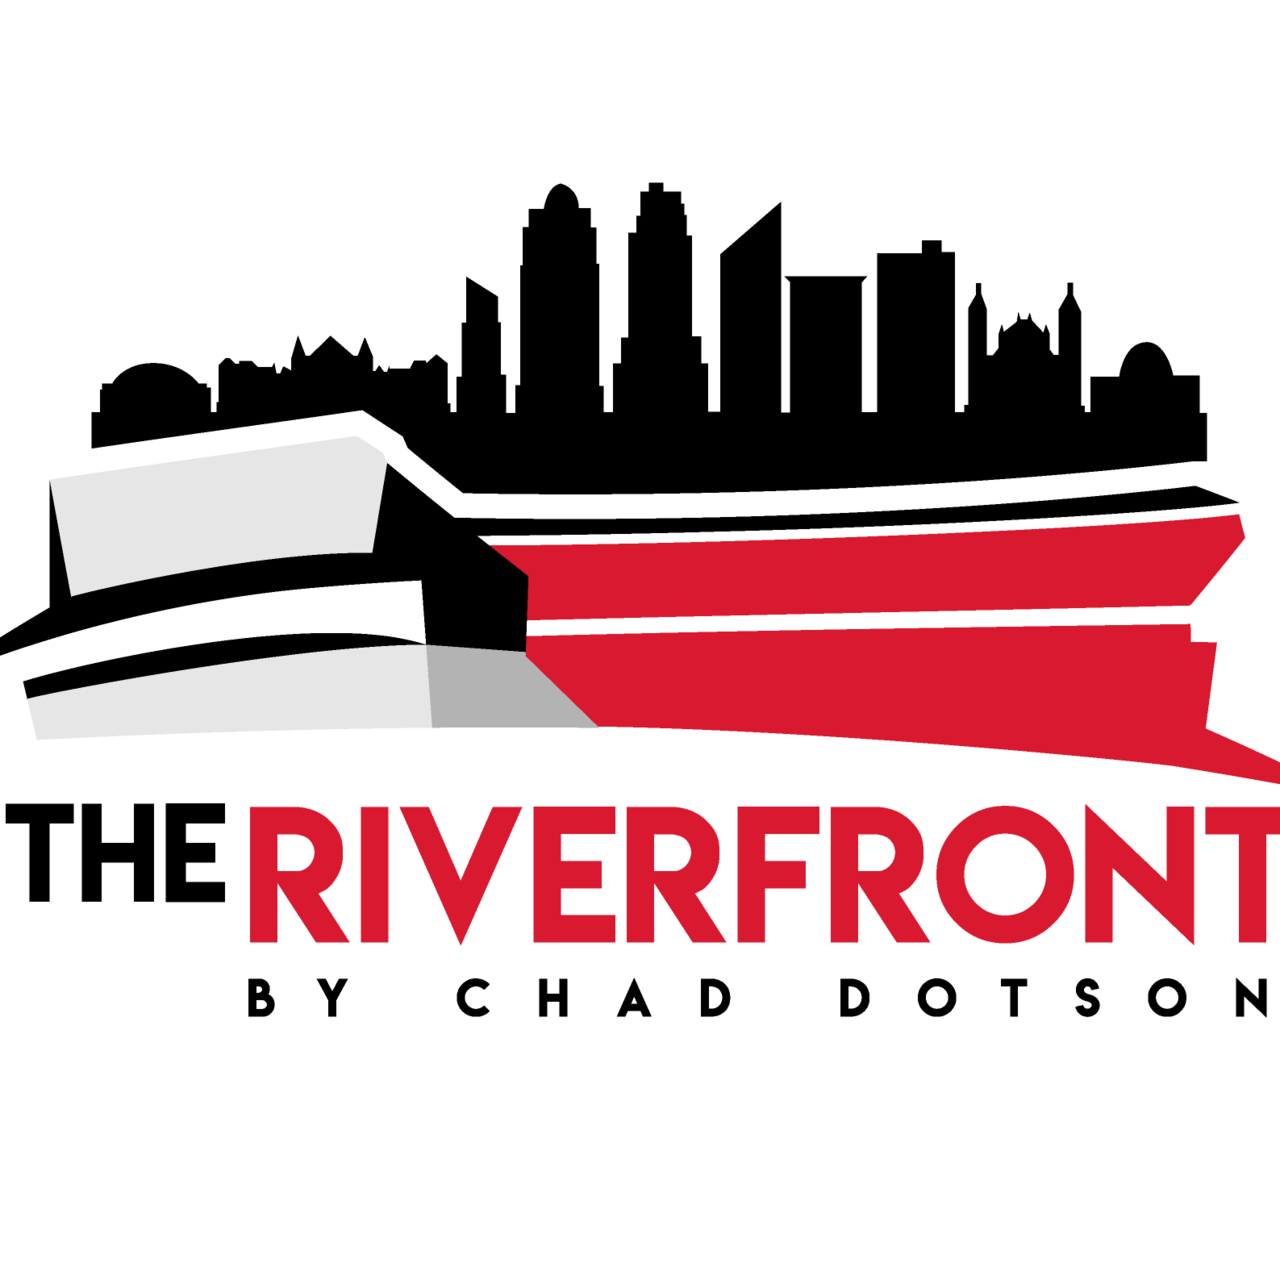 The Riverfront by Chad Dotson